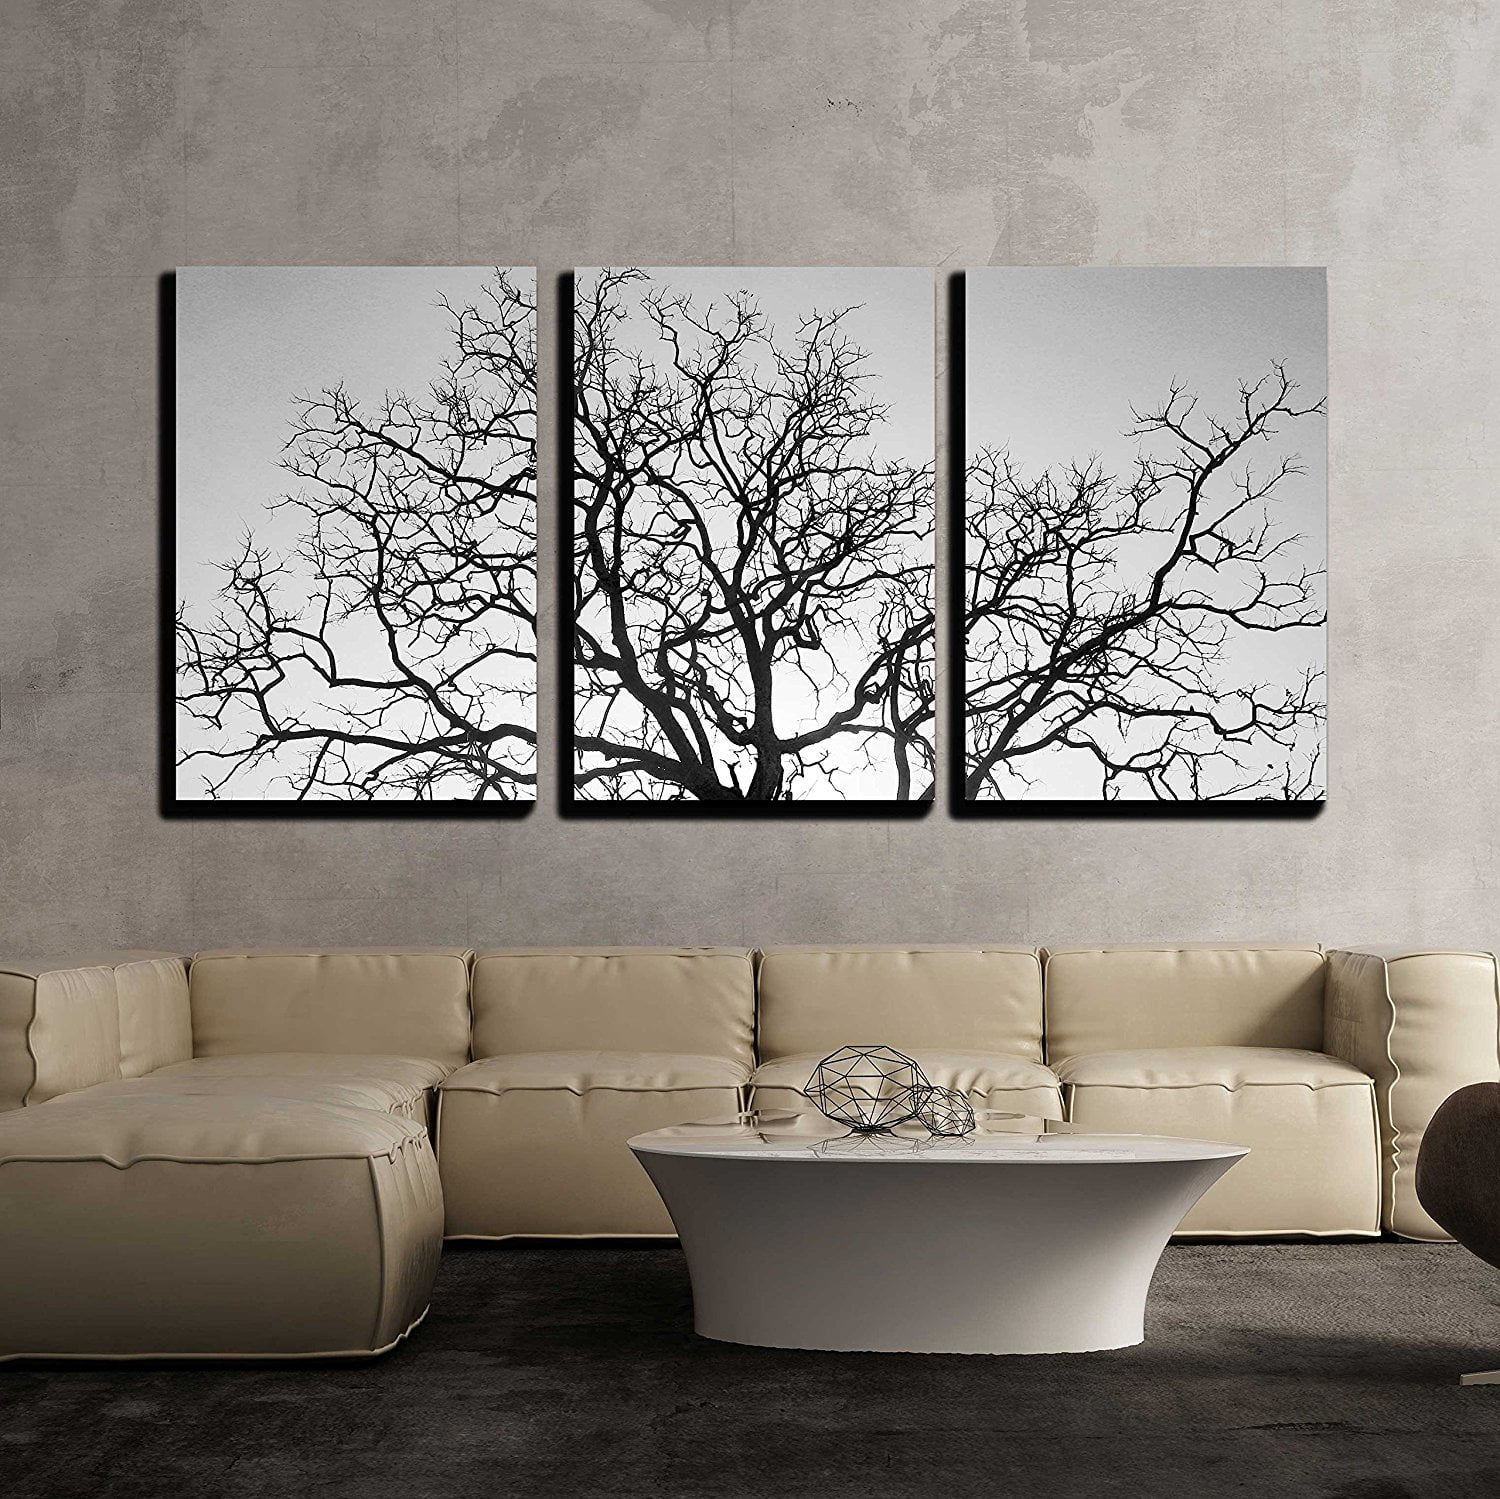 Blood Moon And Dead Trees 1 Panel Canvas Print Wall Art 